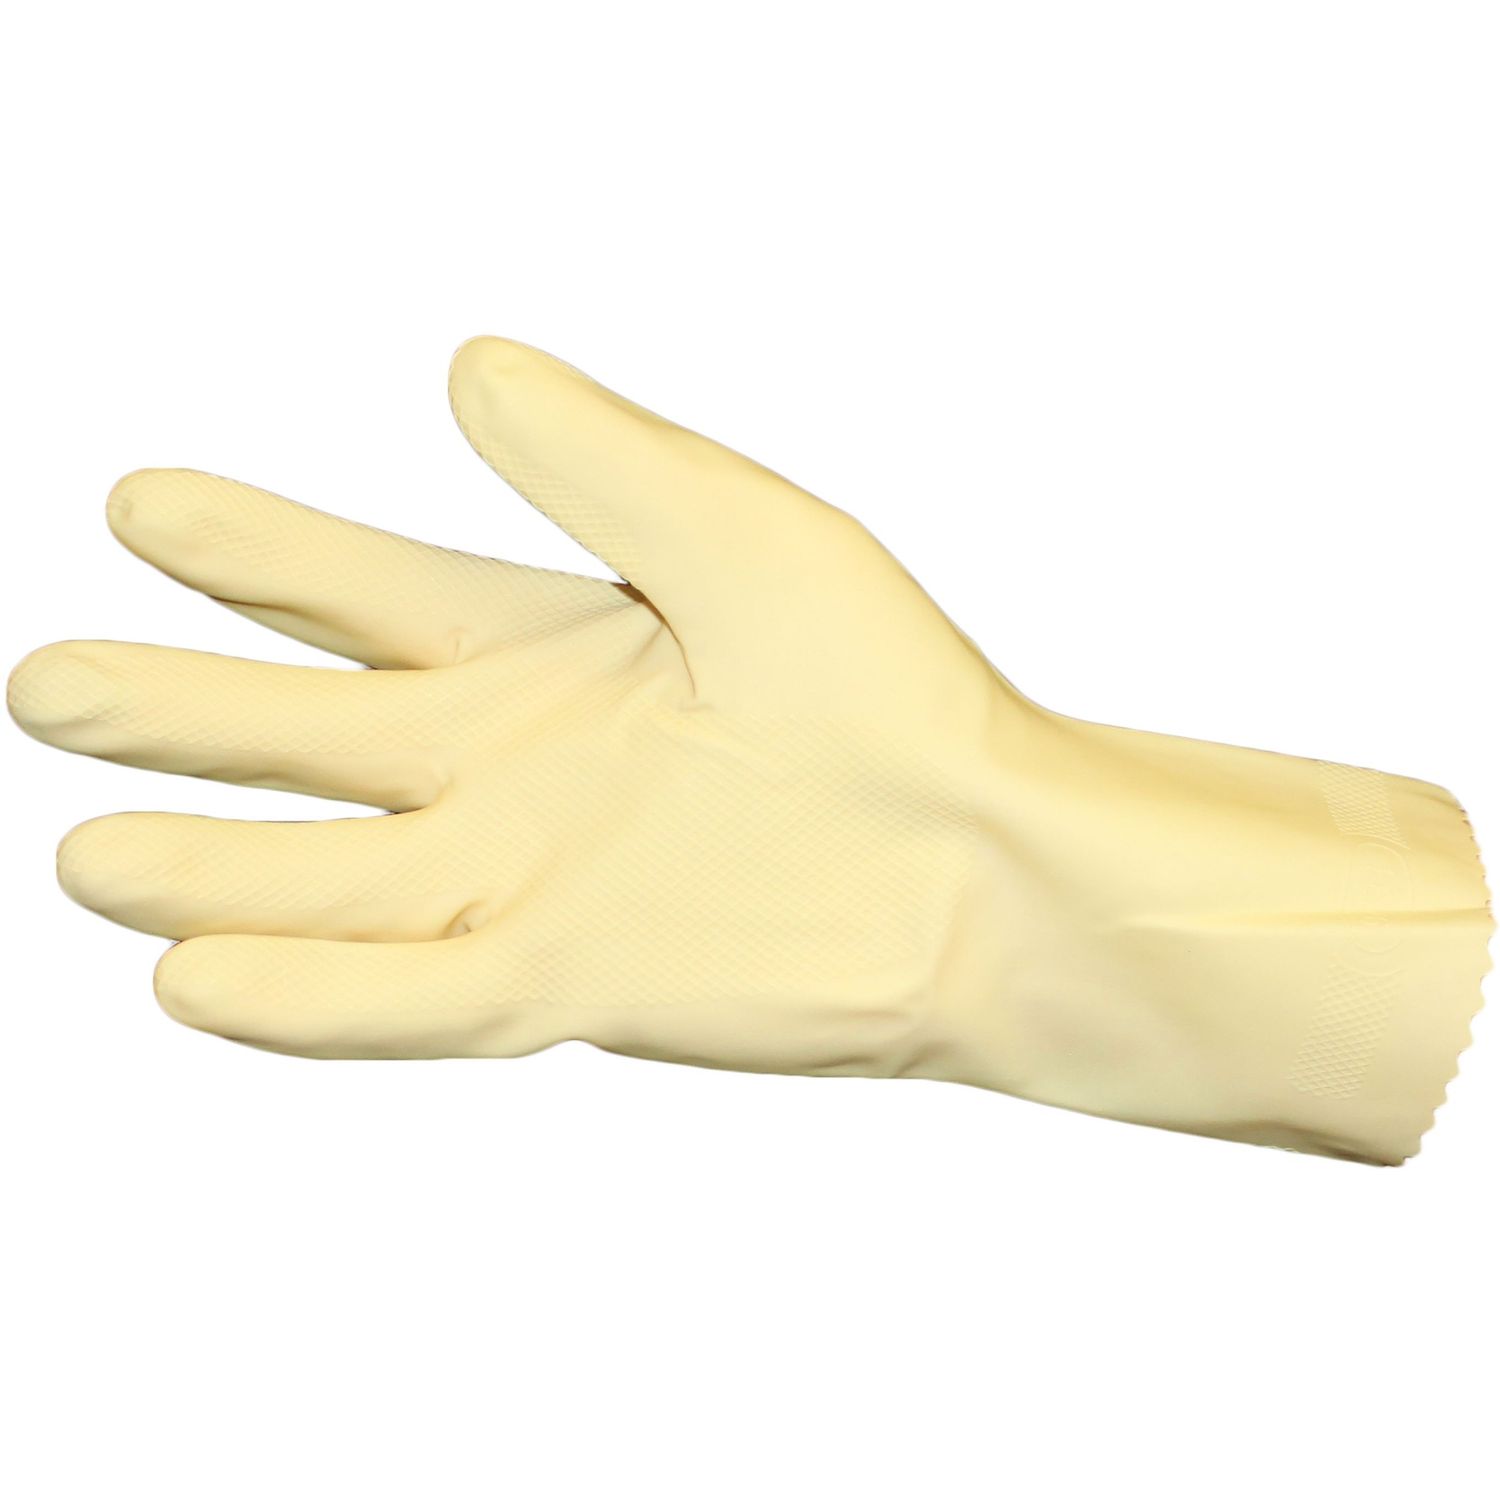 Unlined Latex Reusable Glove Chemical Protection, X-Large Size, Latex, Natural